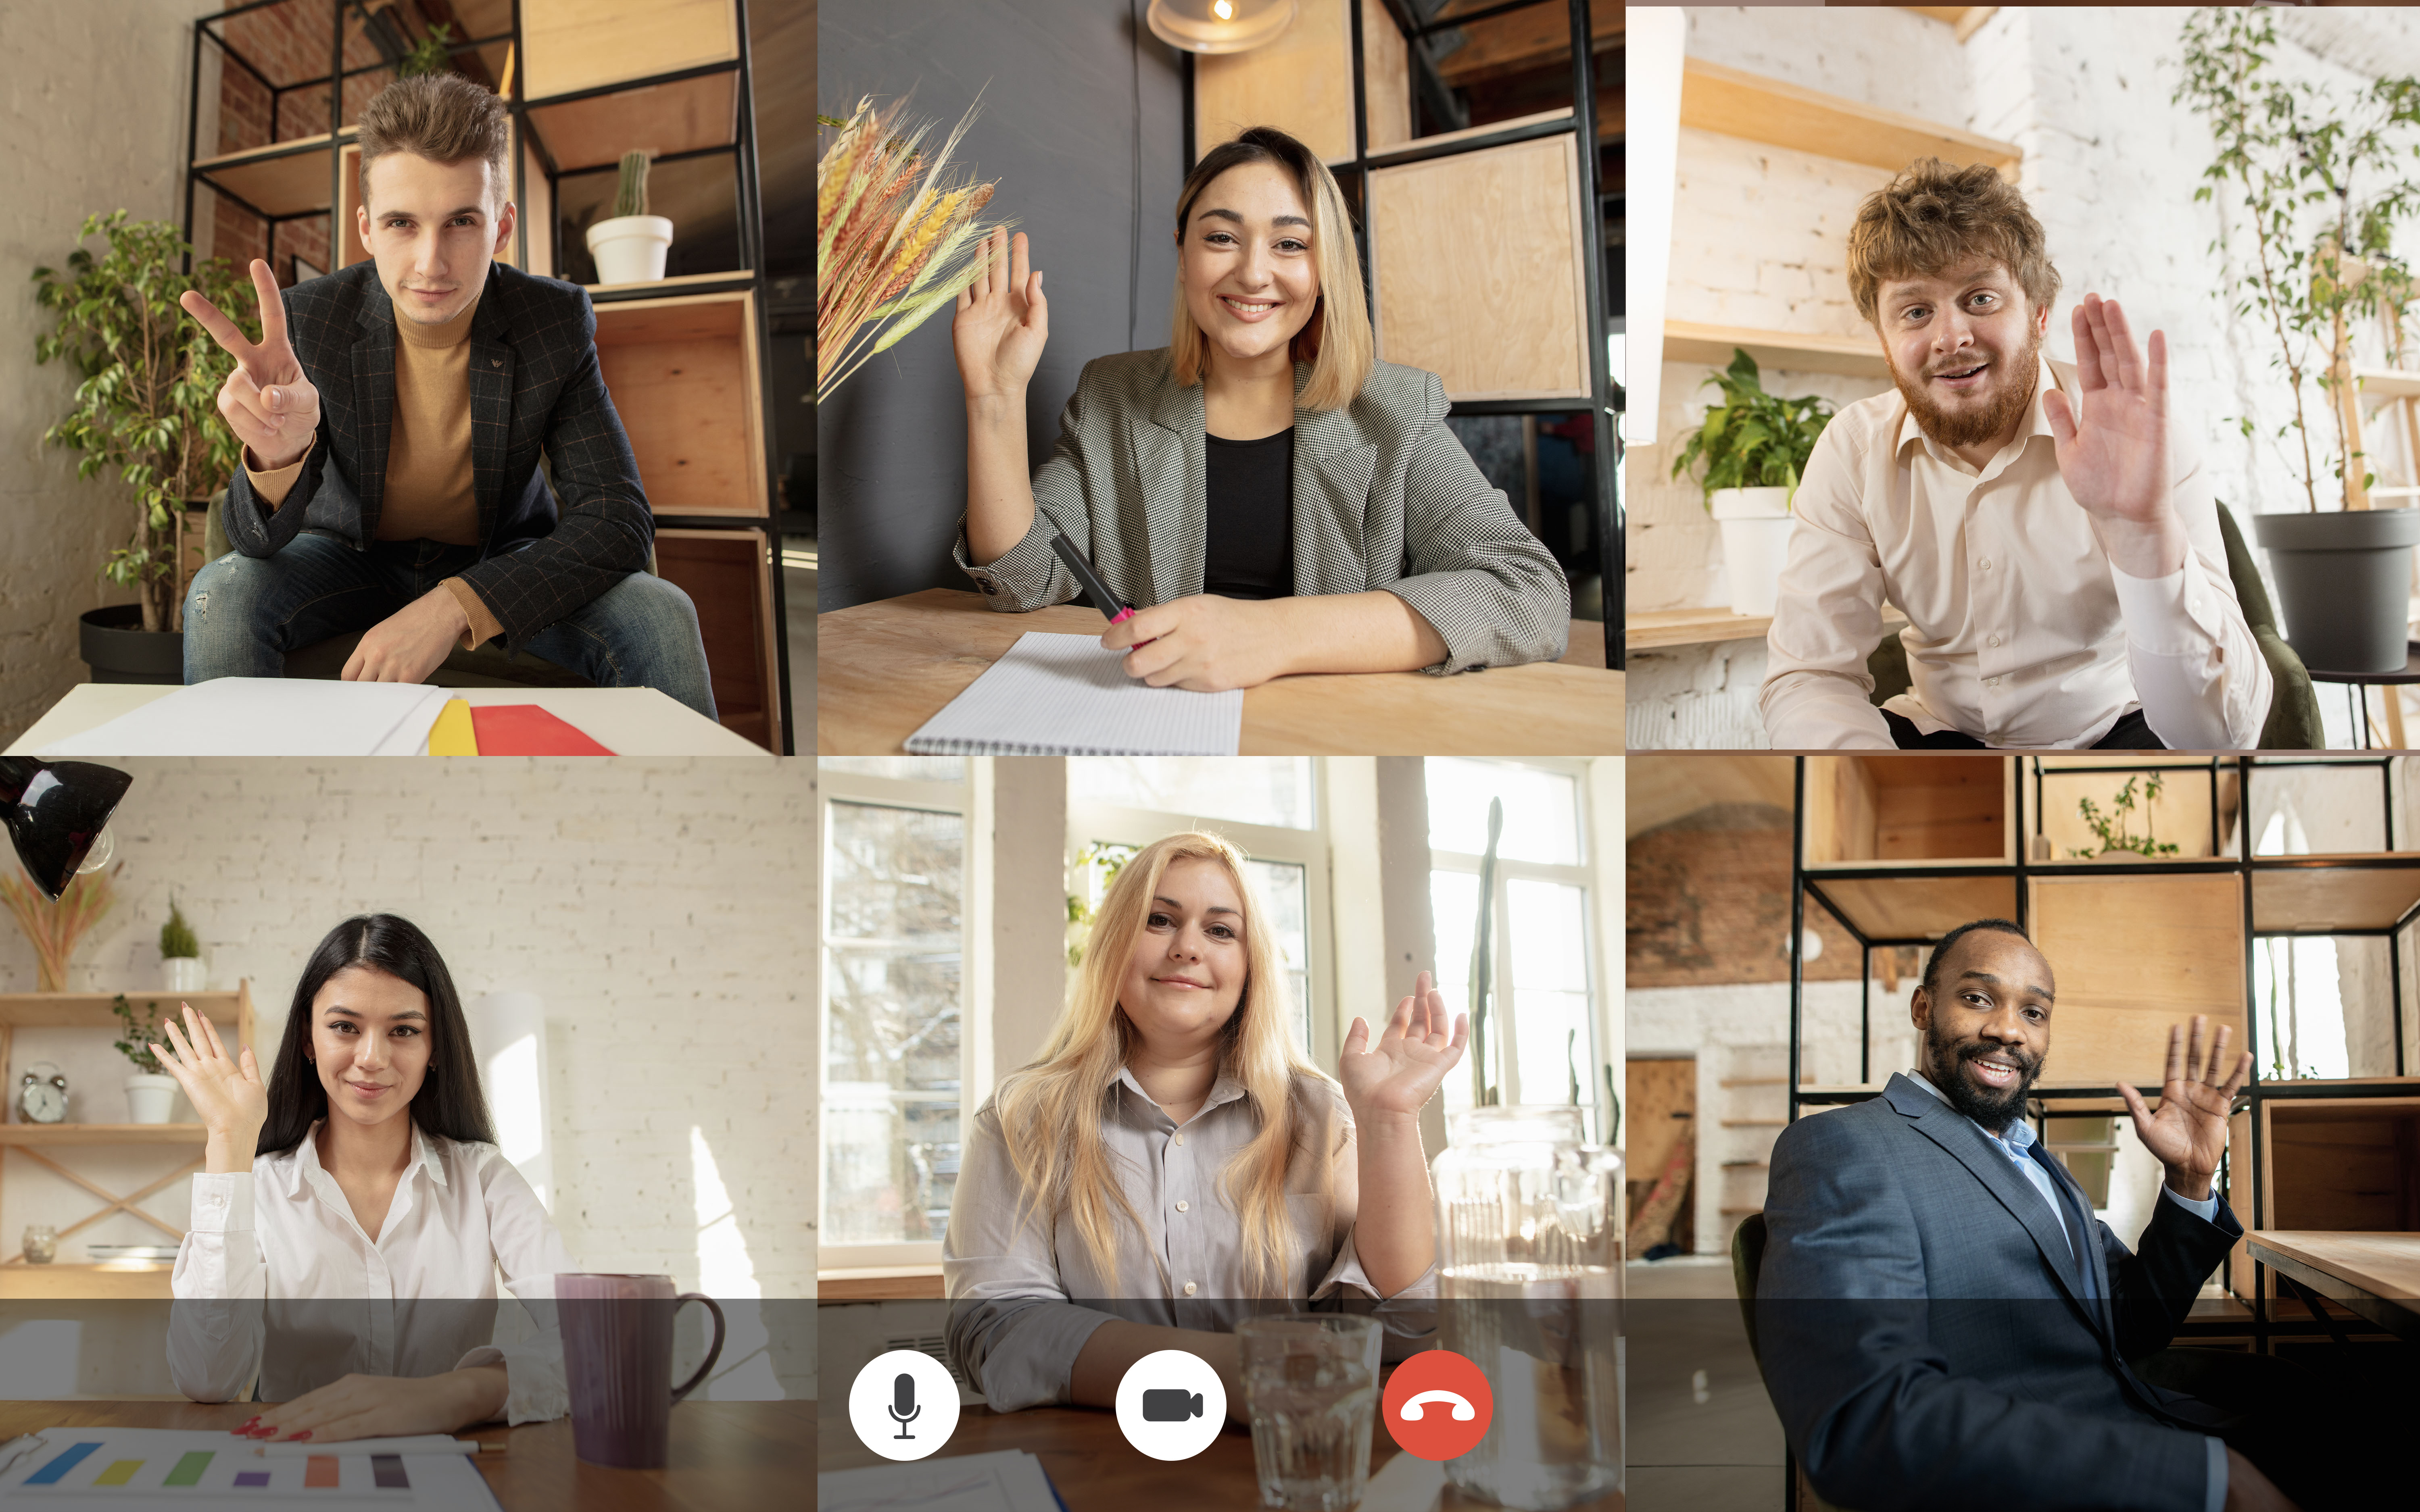 Video conferencing: how to break the ice remotely?